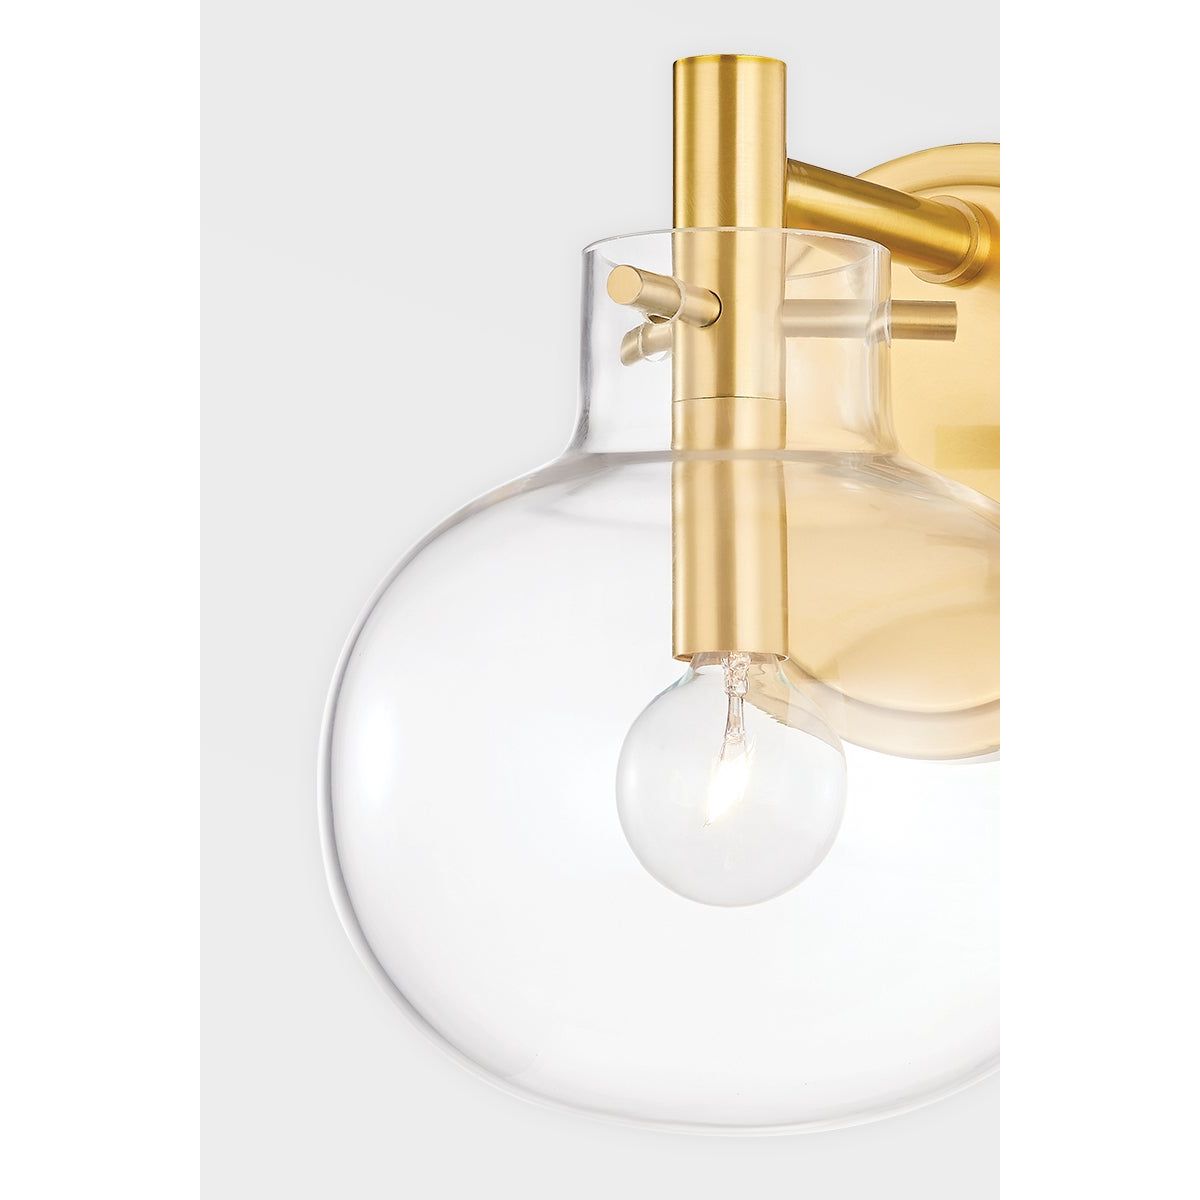 Hempstead Wall Sconce by Hudson Valley Lighting | OPEN BOX